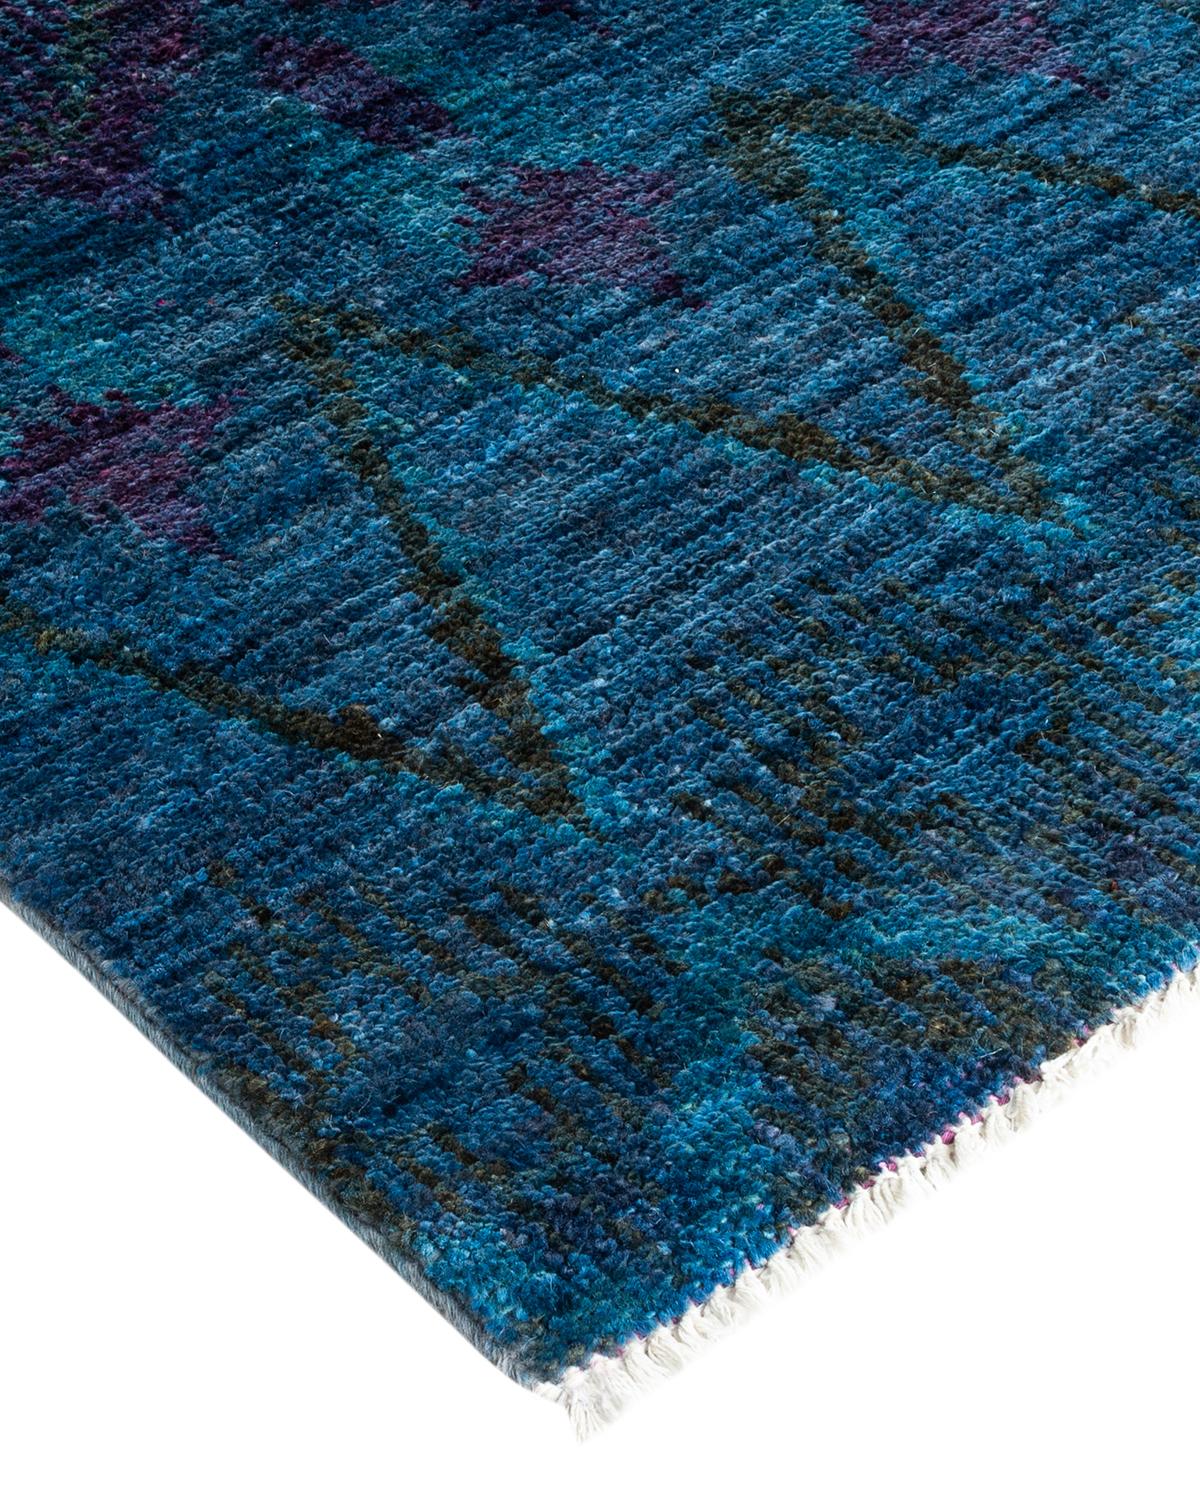 Vibrance rugs epitomize classic with a twist: traditional patterns overdyed in brilliant color. Each hand-knotted rug is washed in a 100% natural botanical dye that reveals hidden nuances in the designs. These are rugs that transcend trends, and